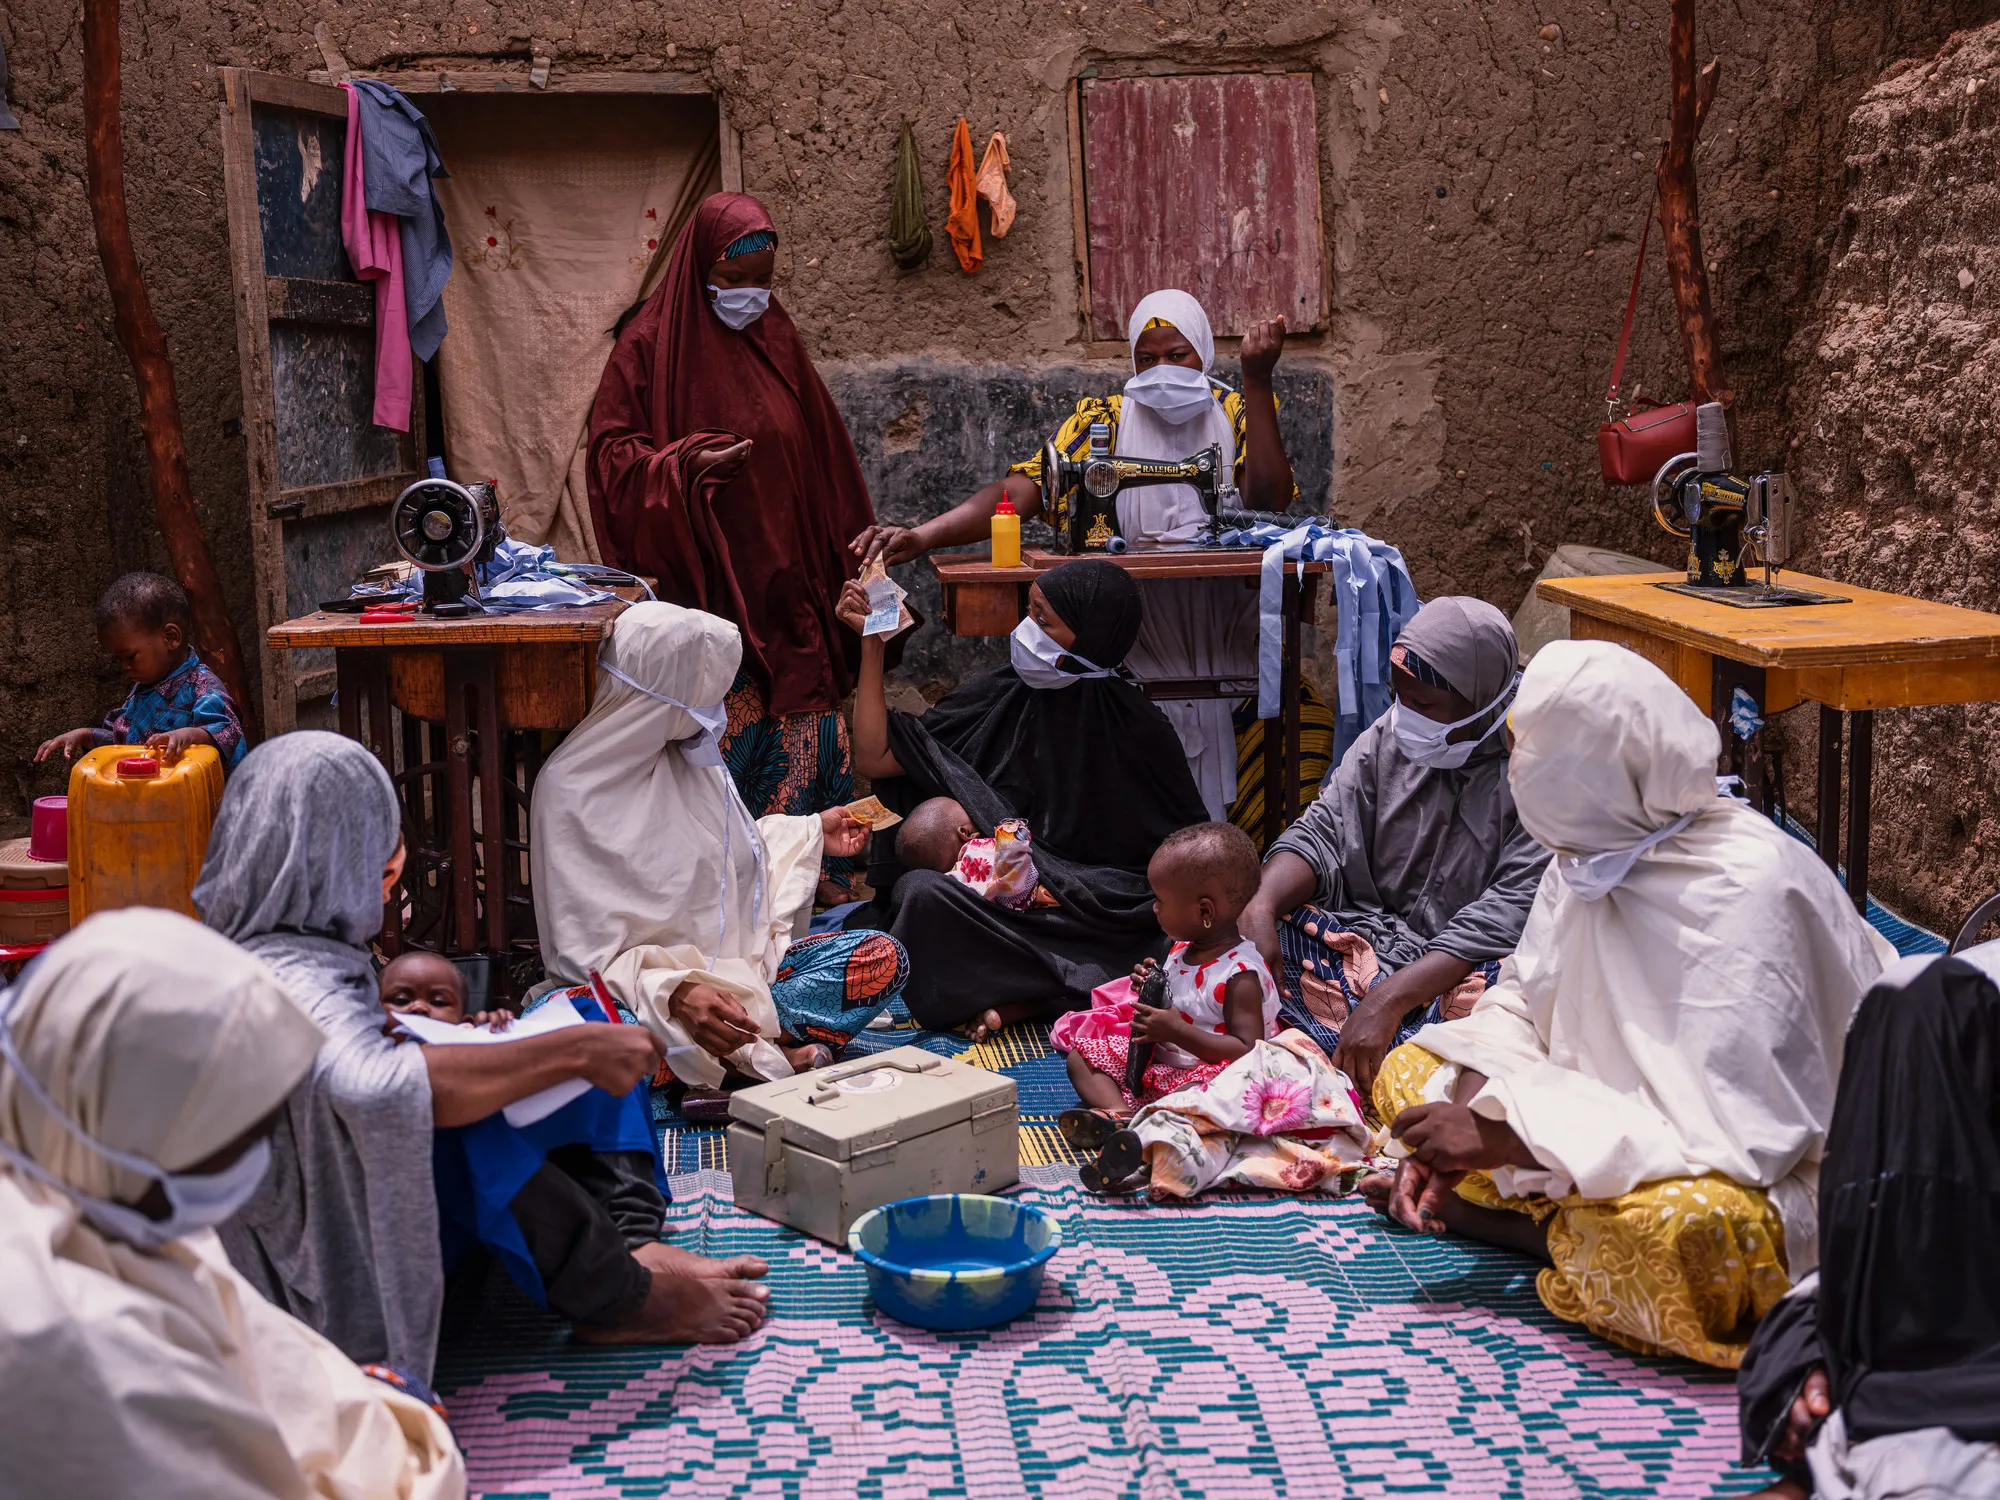 A group of women sit on the floor in front of several tables with sewing machines in Niger. A metal bank box is in the center of the group.